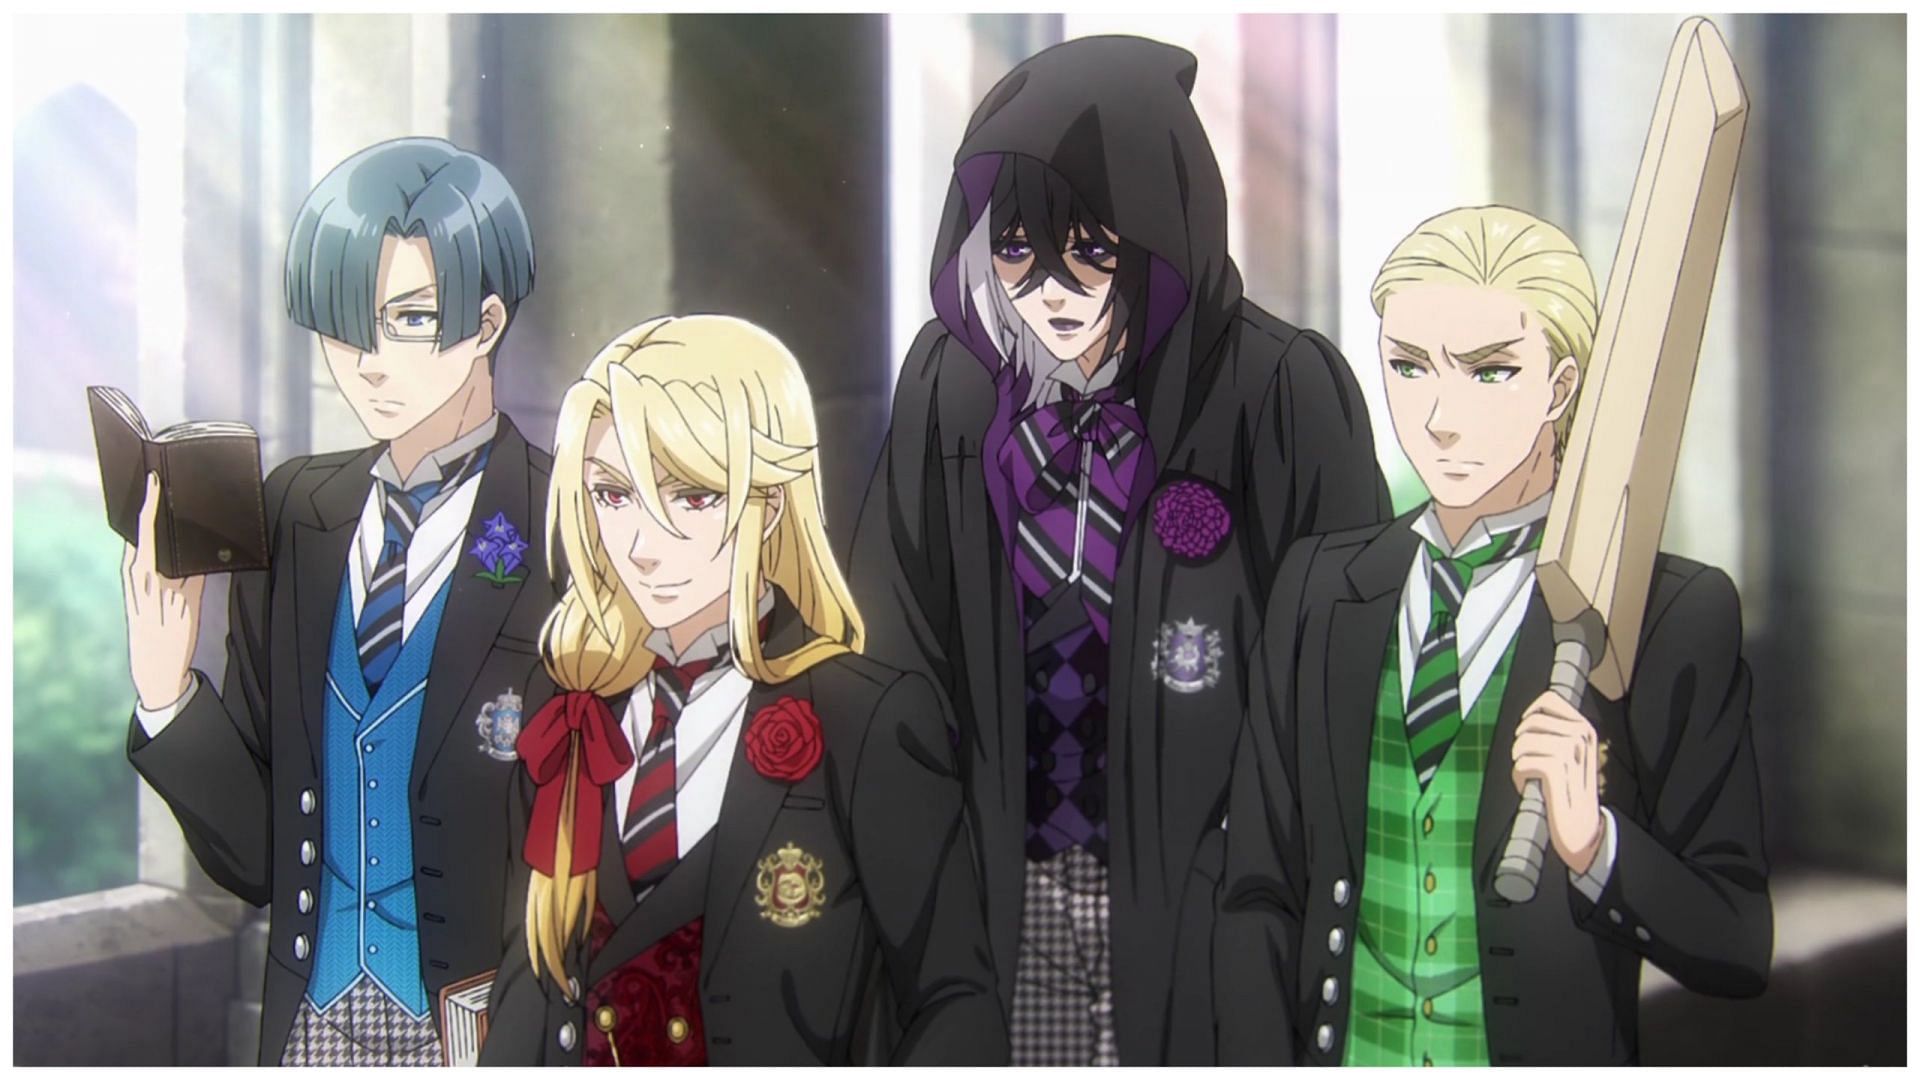 The Four Prefects from Black Butler season 4 (Image via CloverWorks)